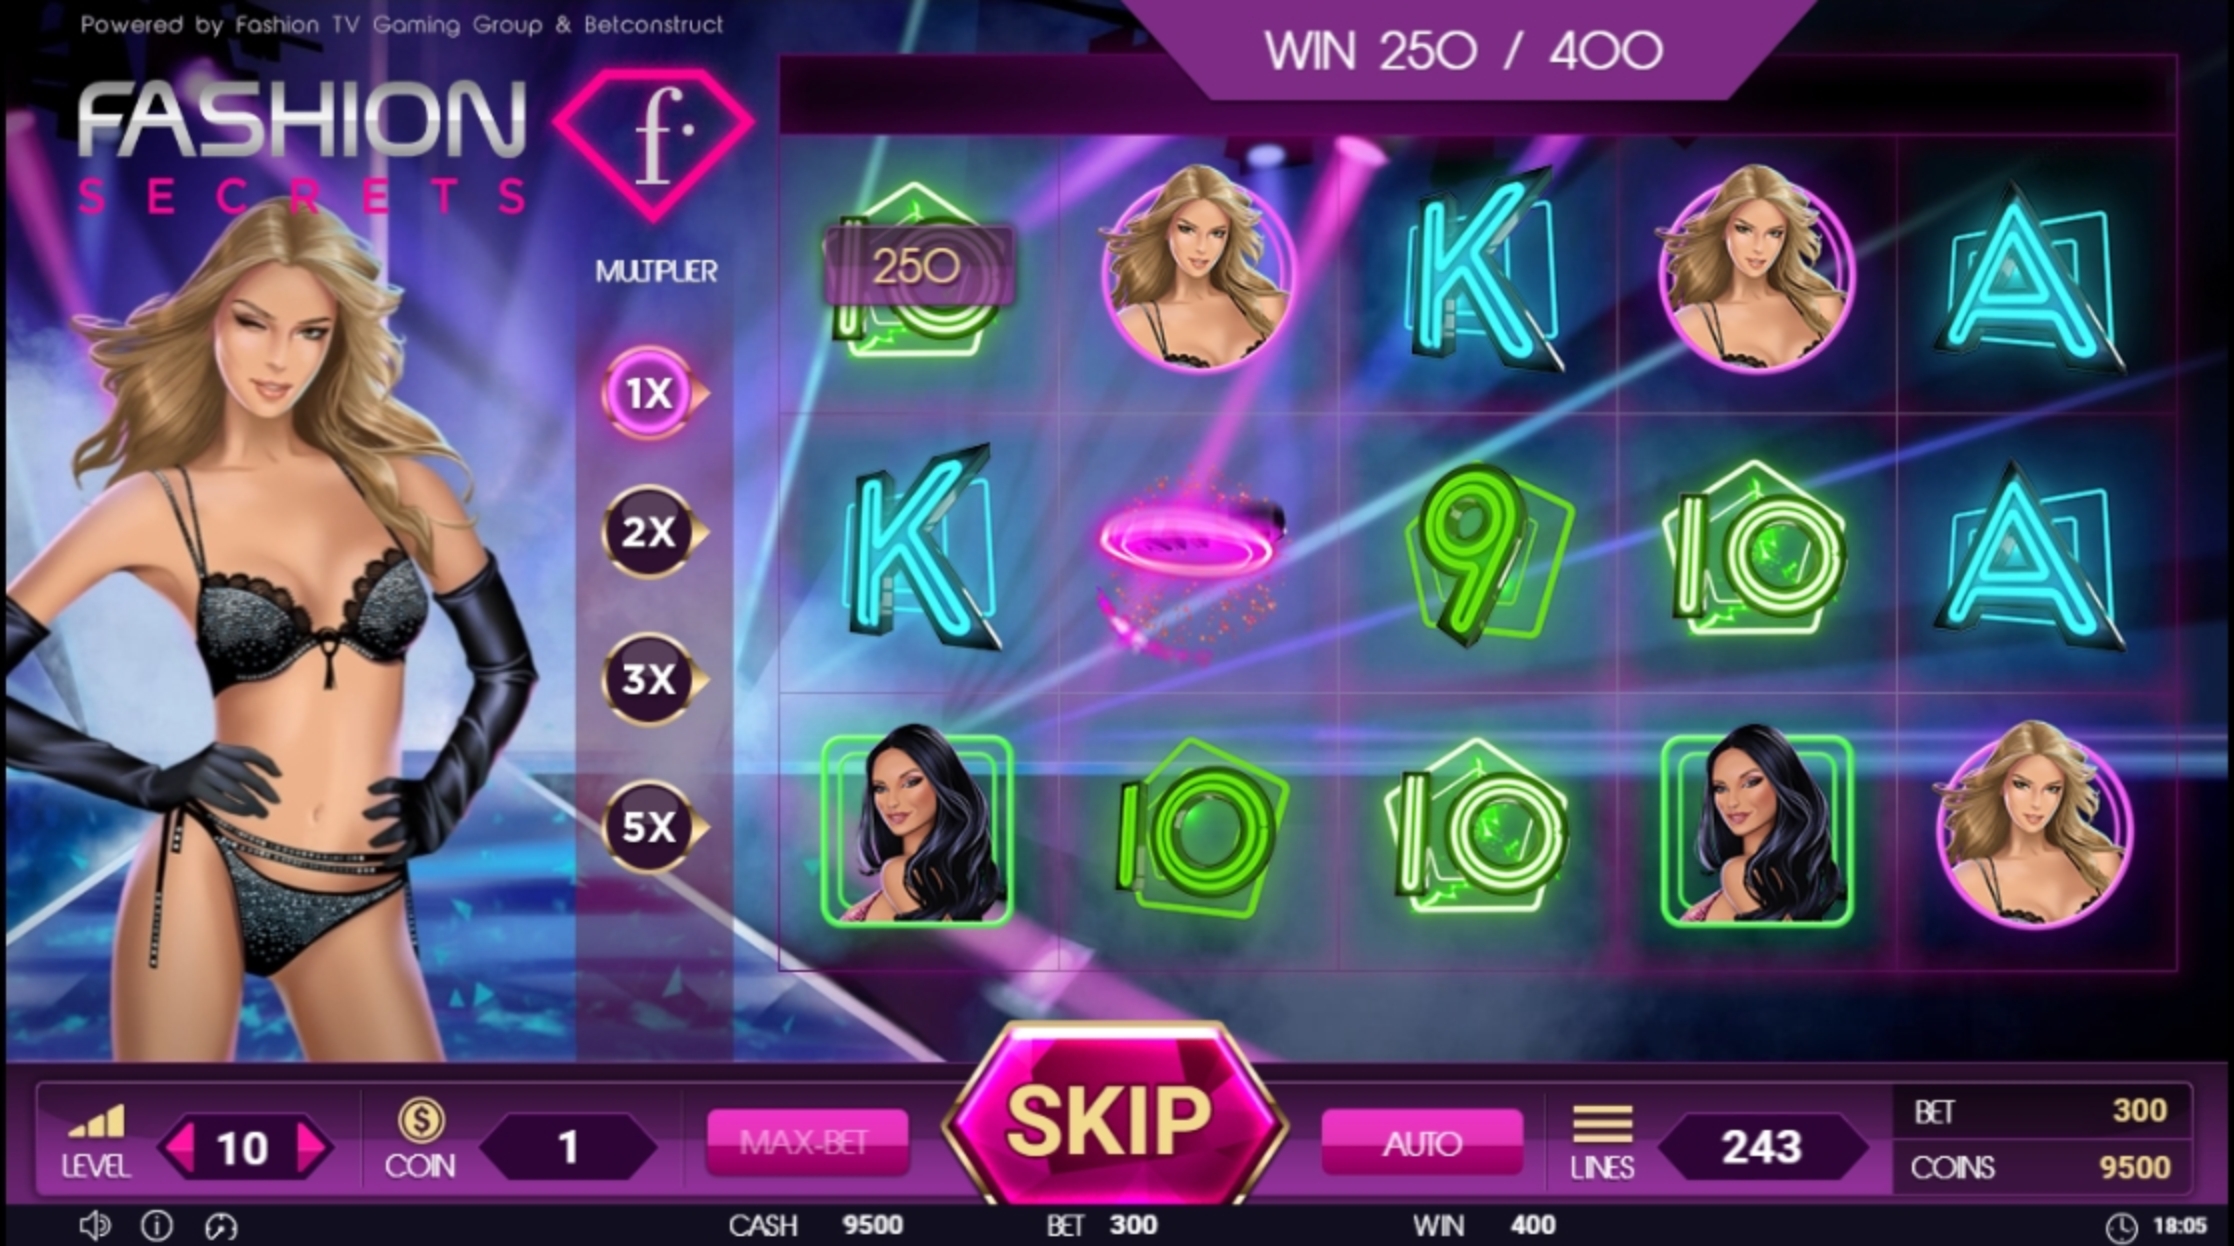 Win Money in Fashion Secrets Free Slot Game by Betconstruct